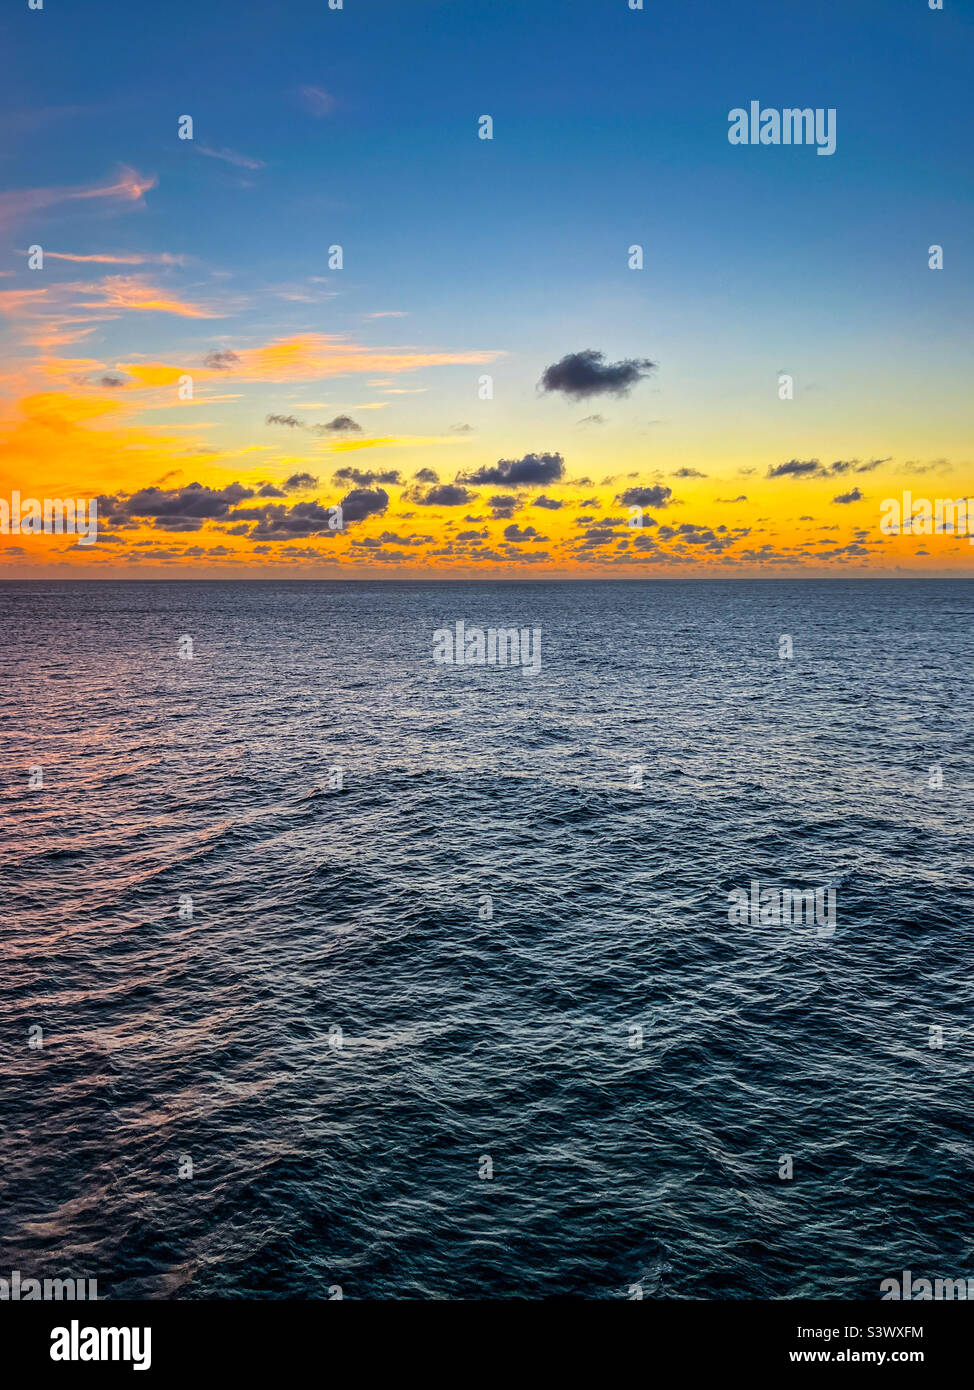 Sunrise over the Bay of Biscay in the Atlantic Ocean Stock Photo